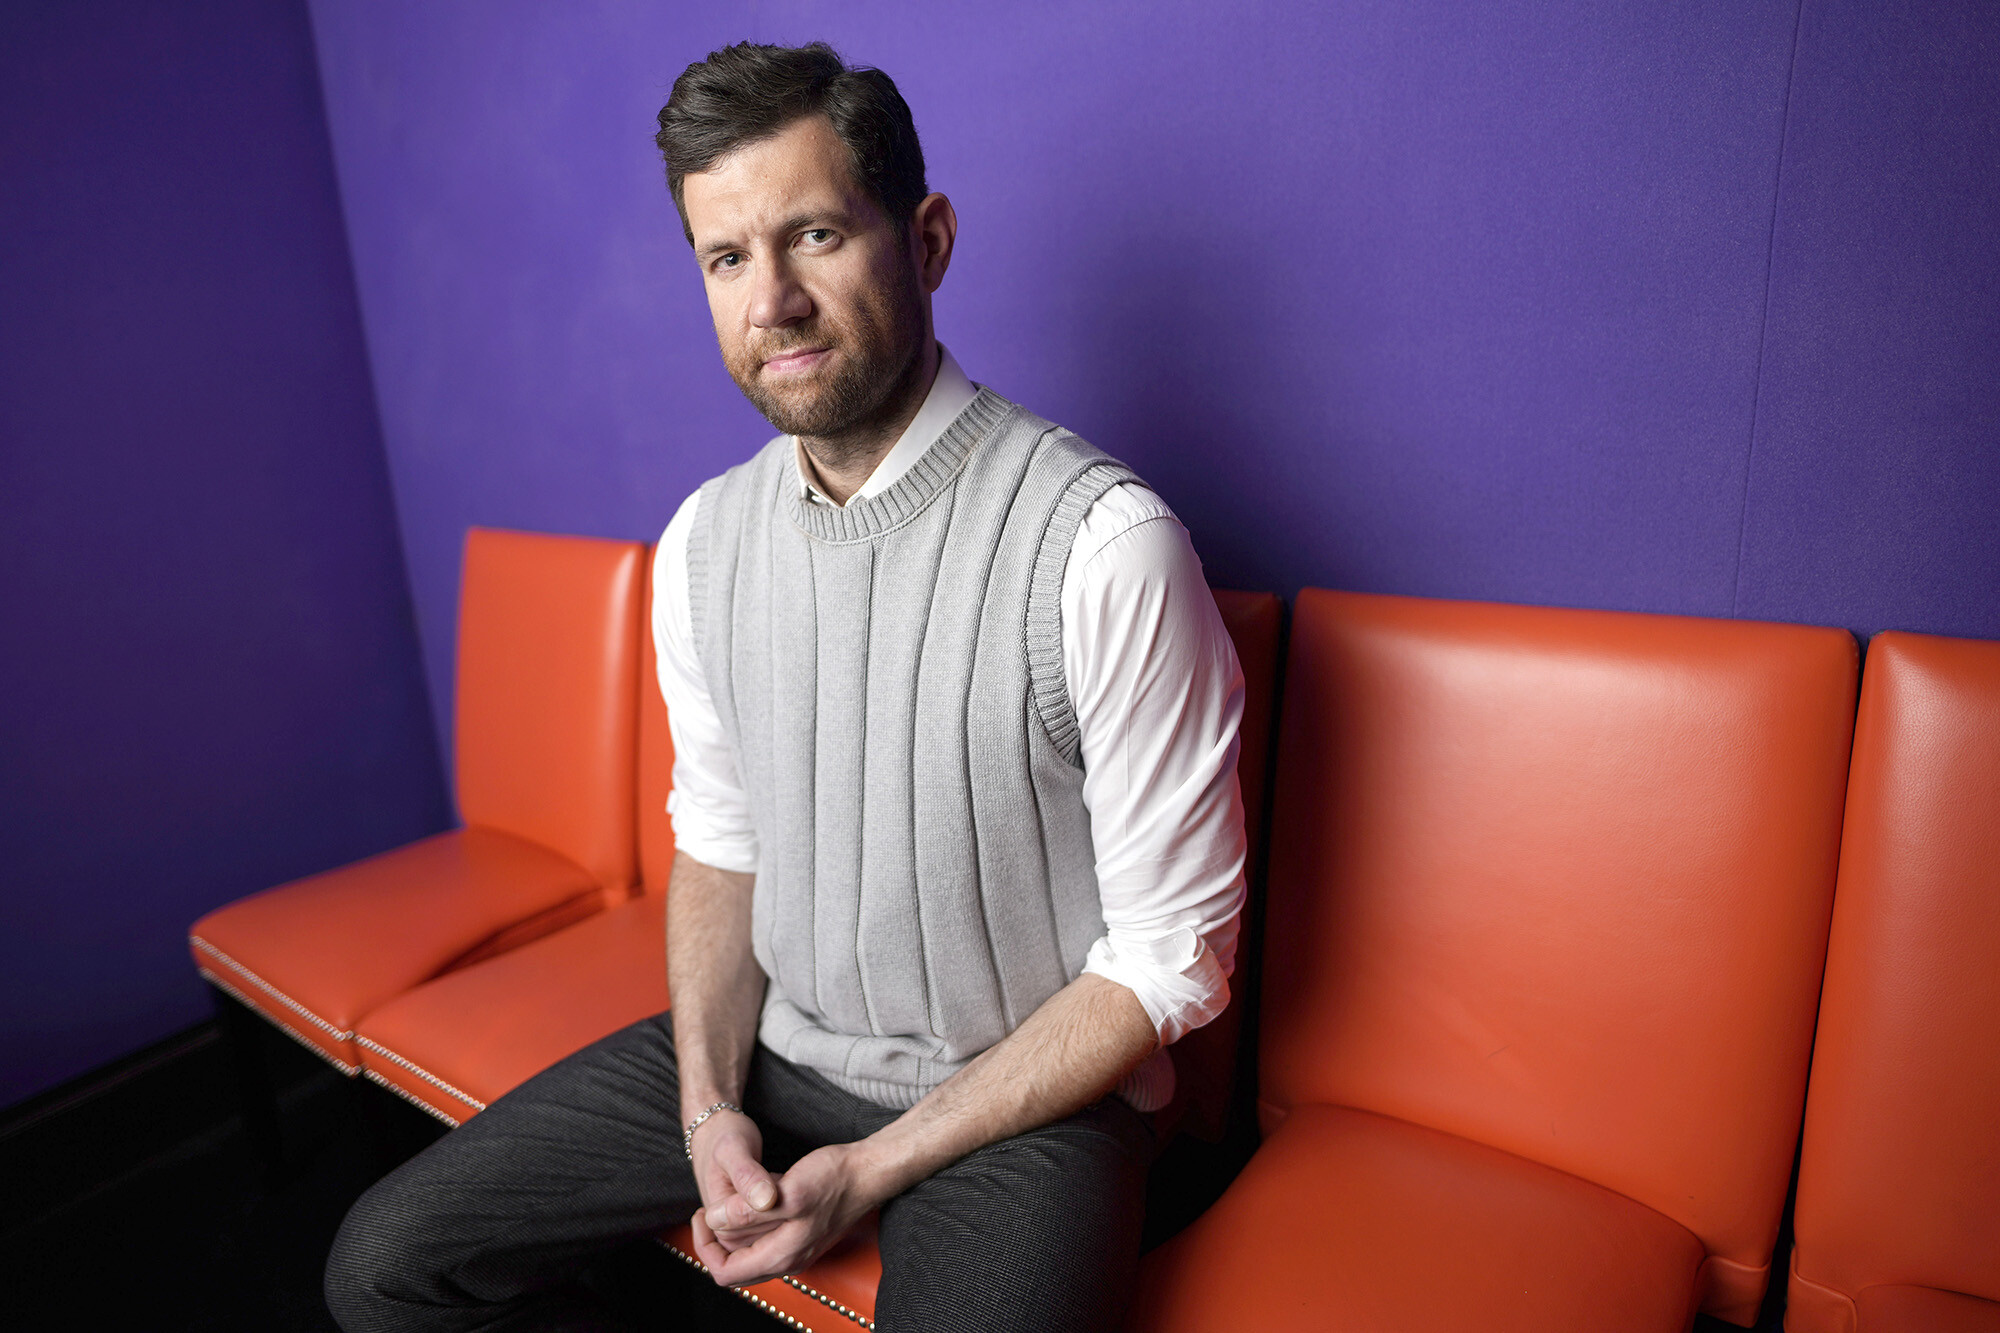 Billy Eichner poses for a portrait at the Crosby Street Hotel to promote his film "Bros" on Monday